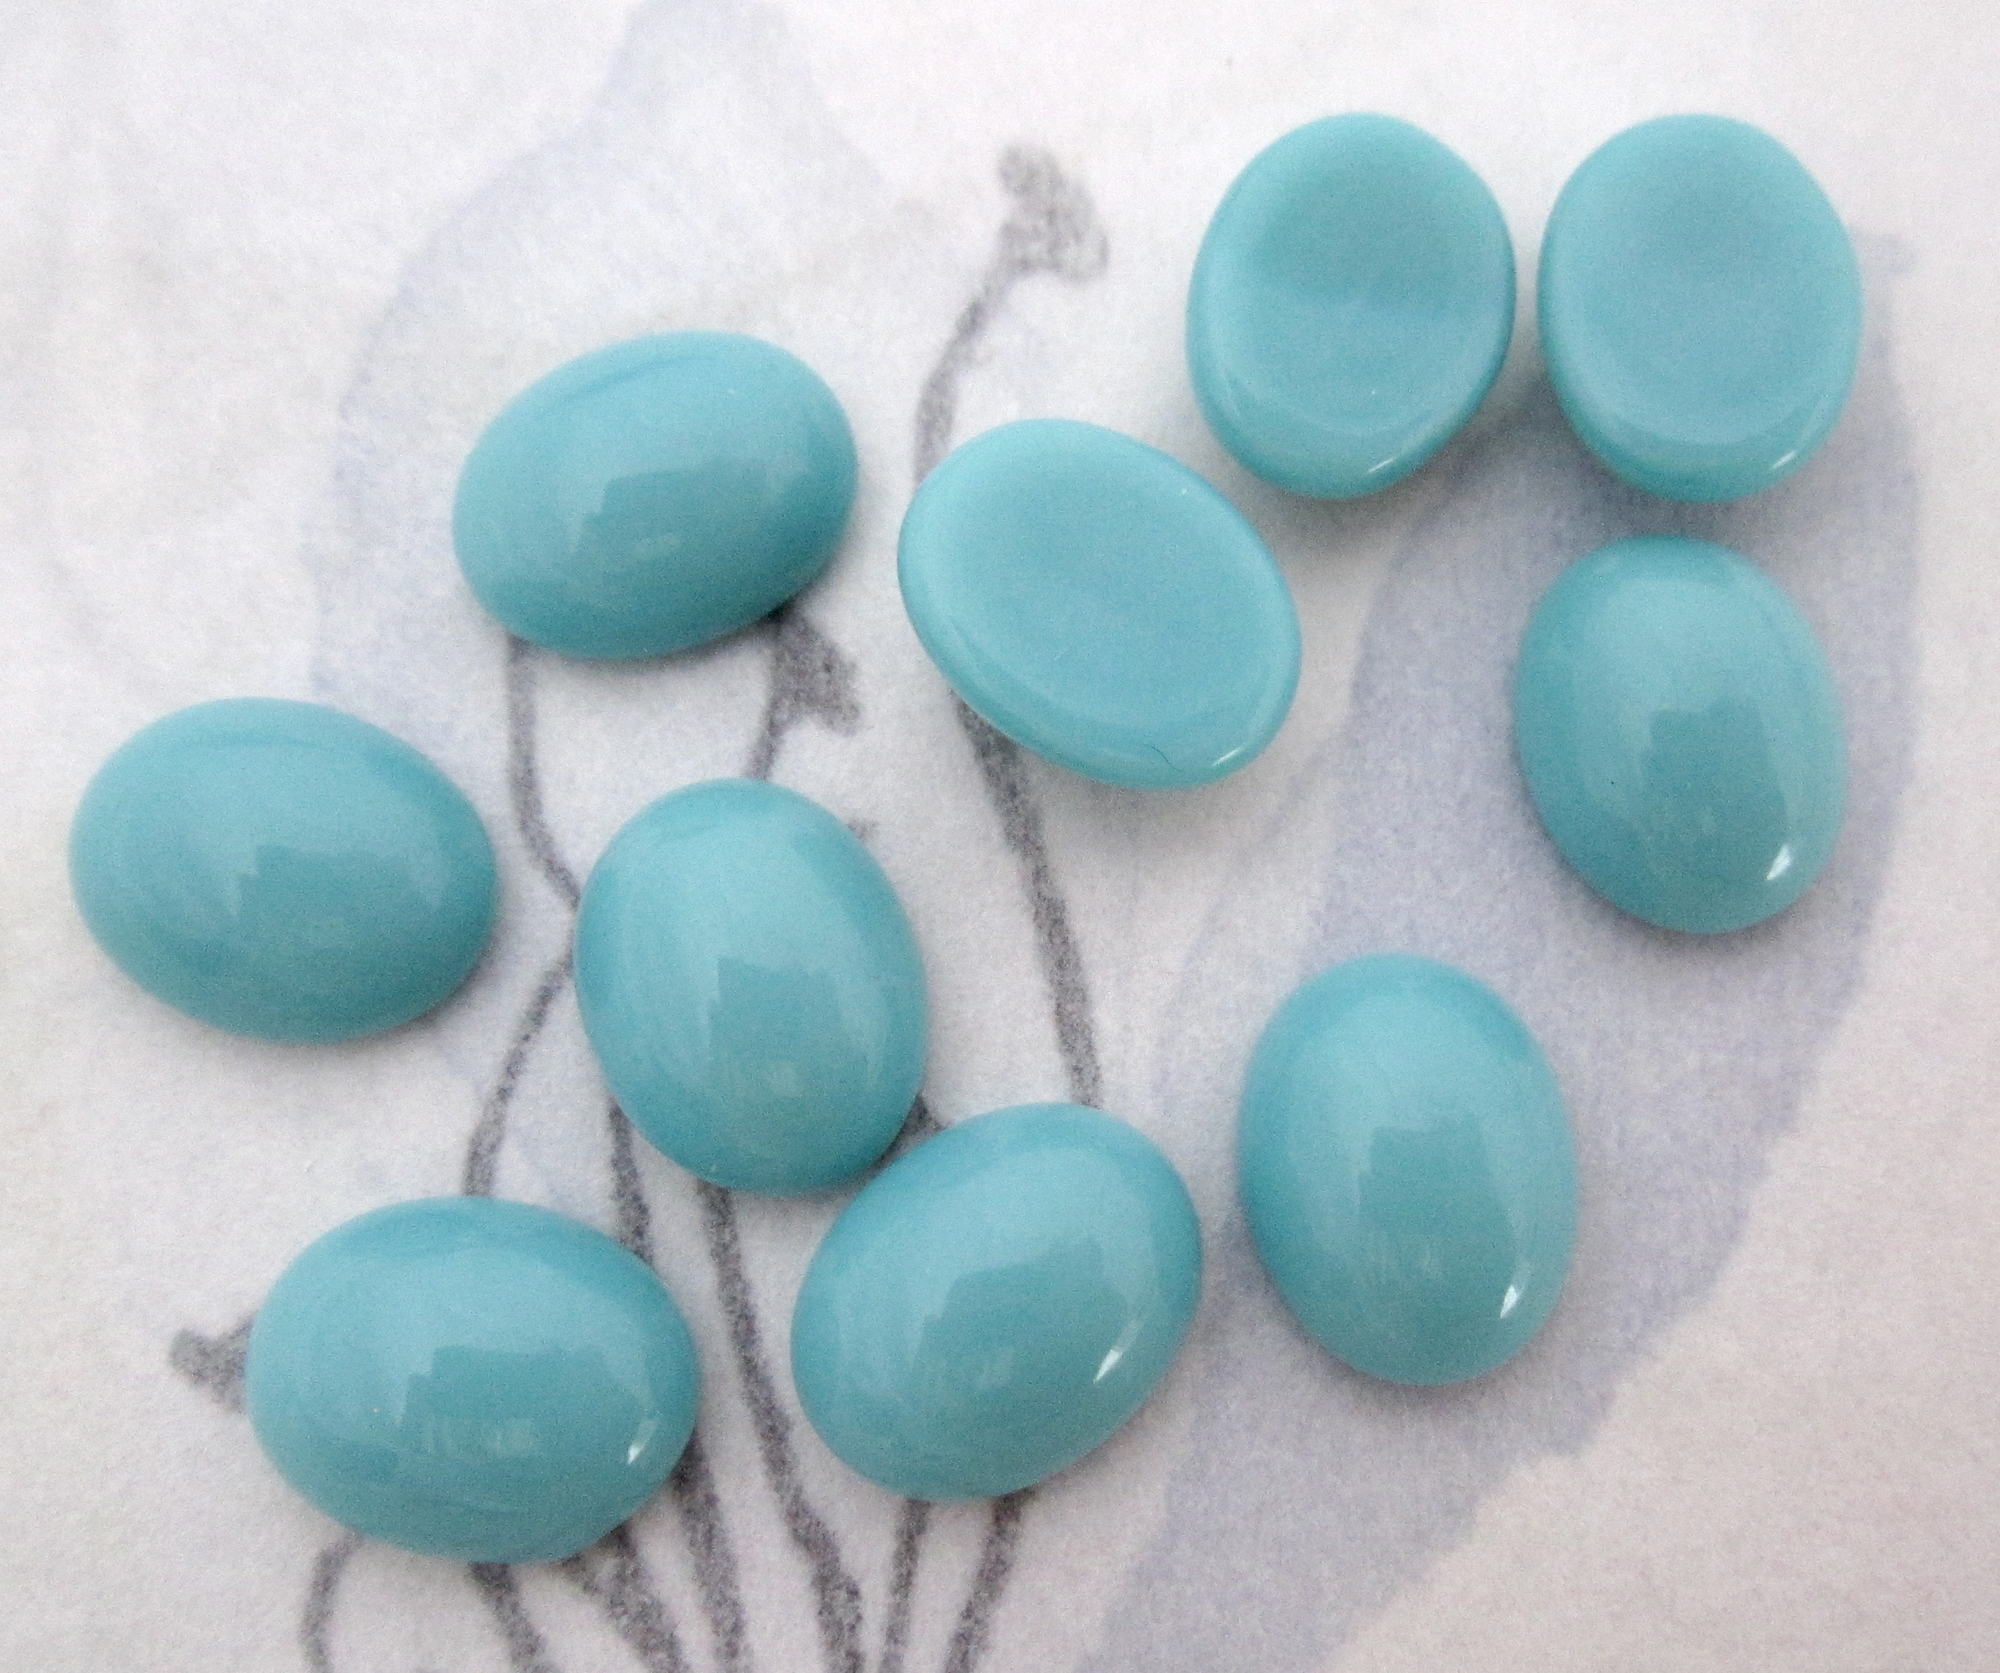 Turquoise Blue Oval Flat Back Cabochons At Pitula The Jeweler